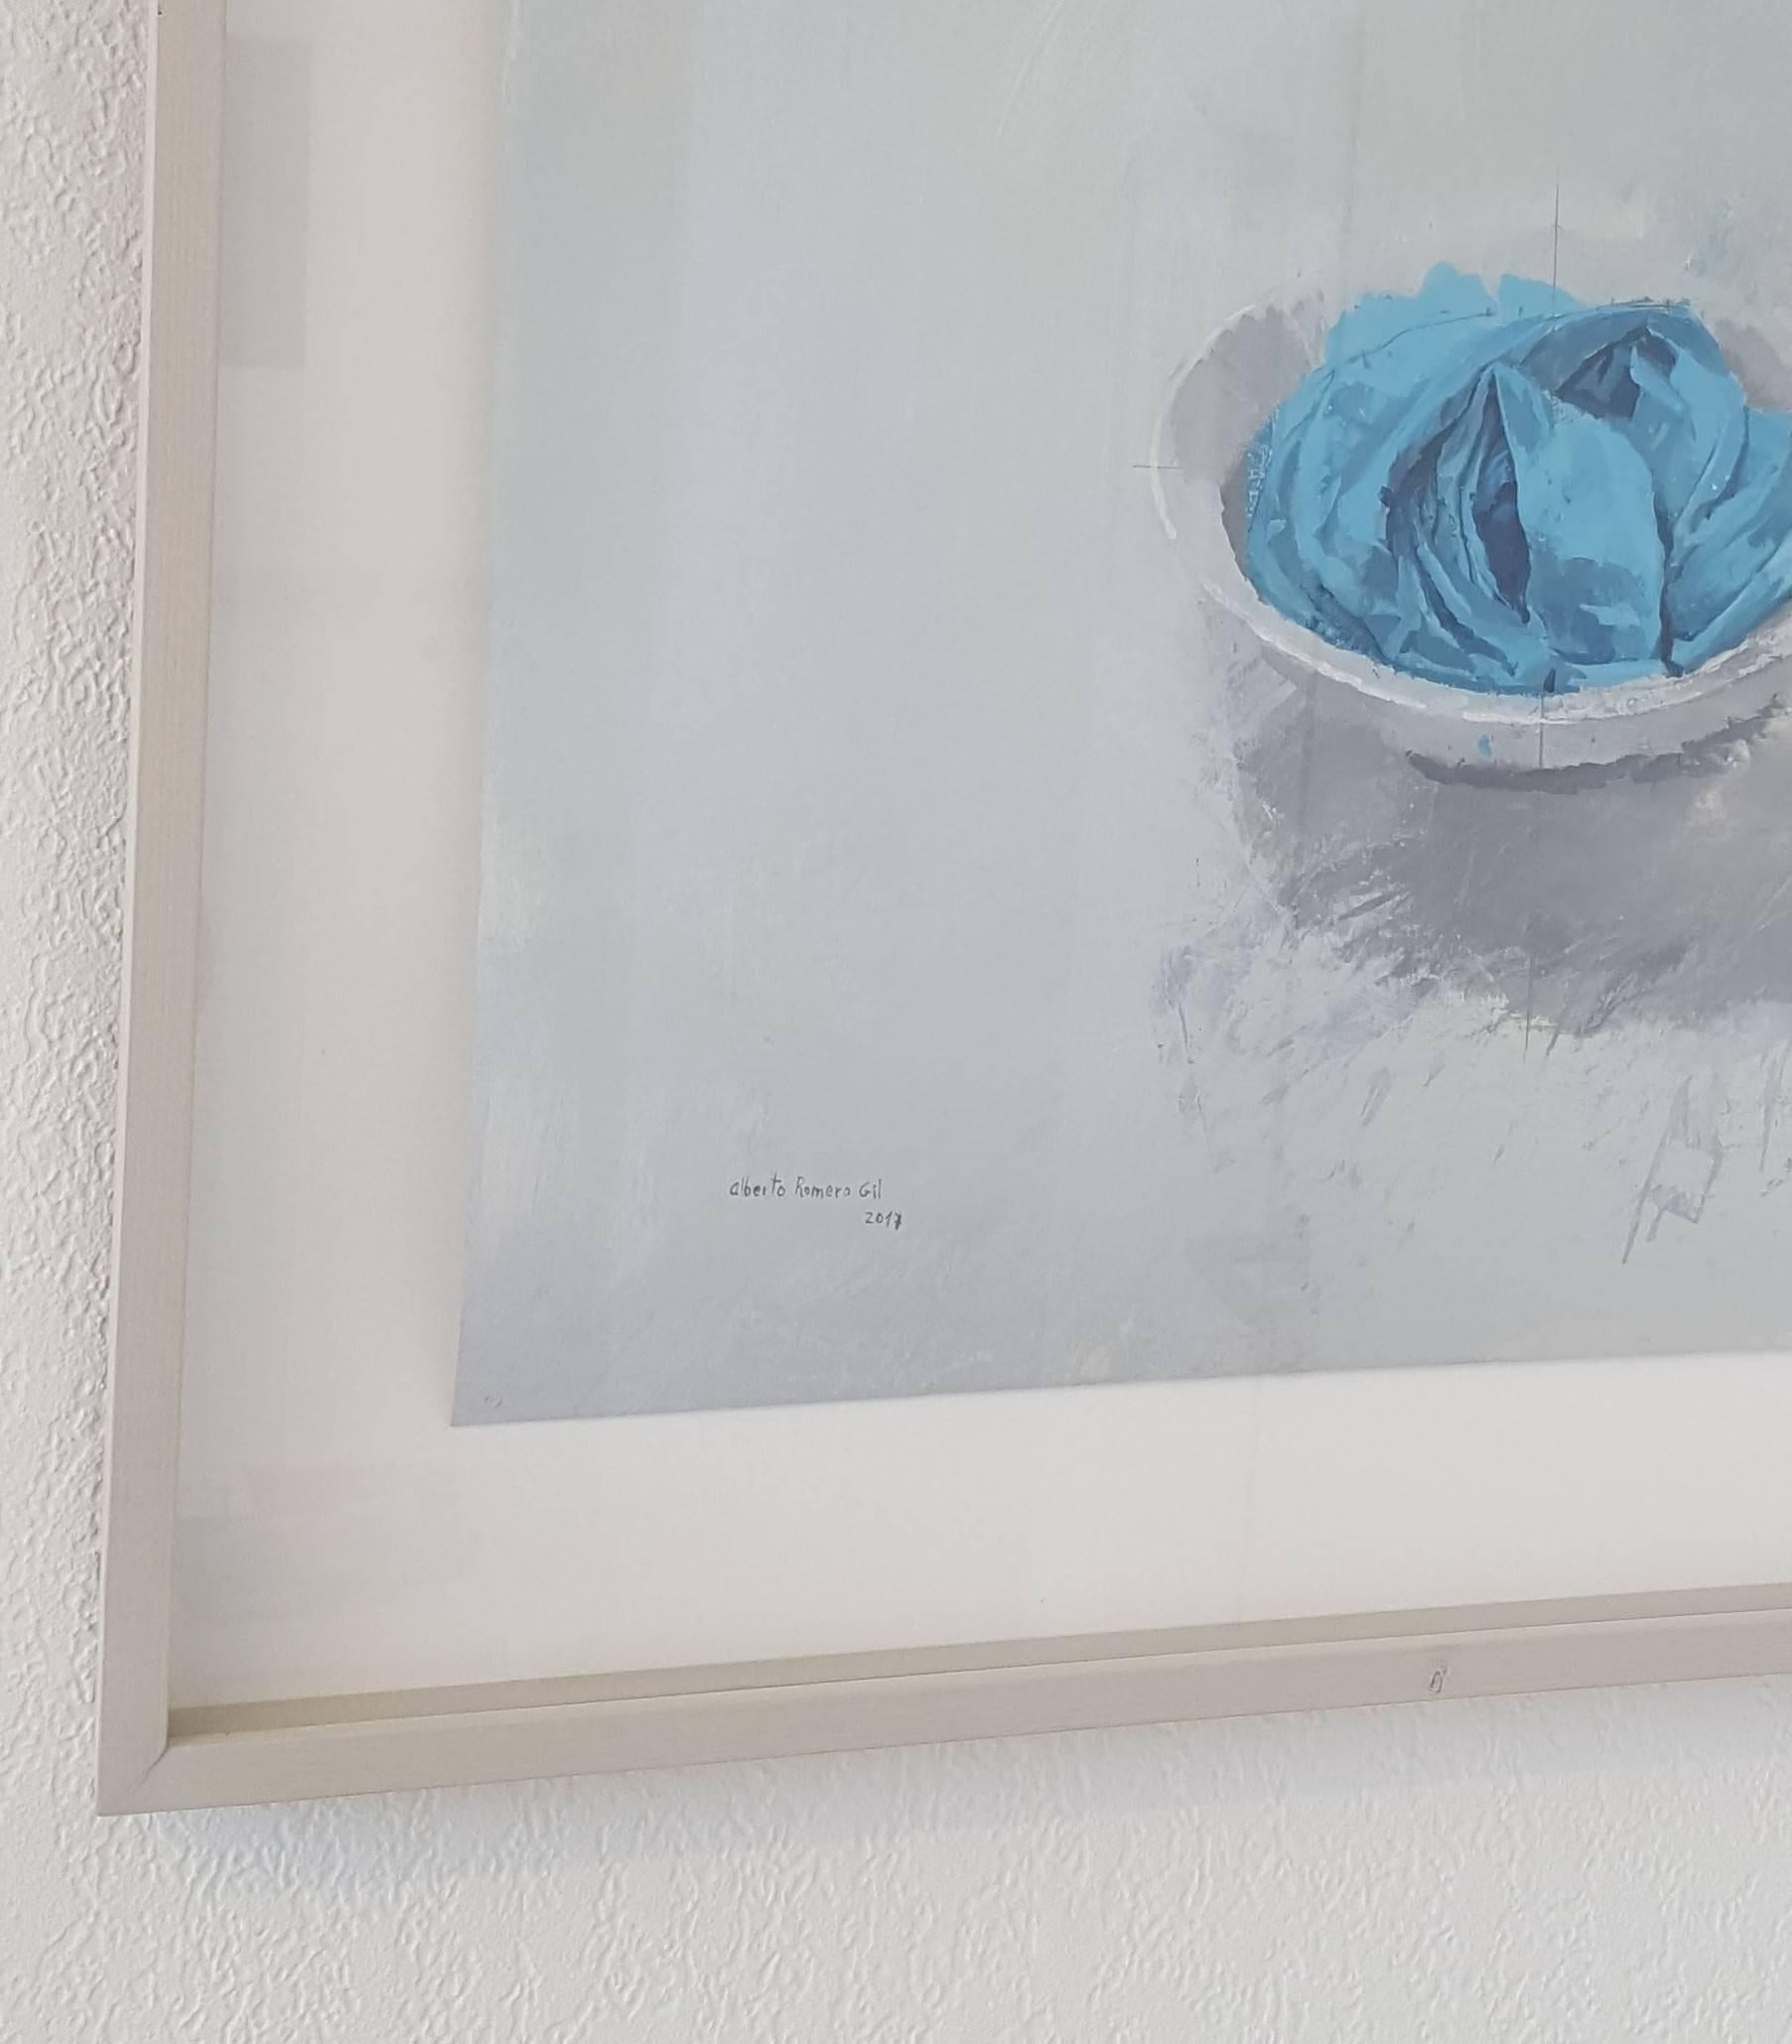  Bowl with blue cloth - still life - 21st century Realism Oil on Paper - Painting by Alberto Romero